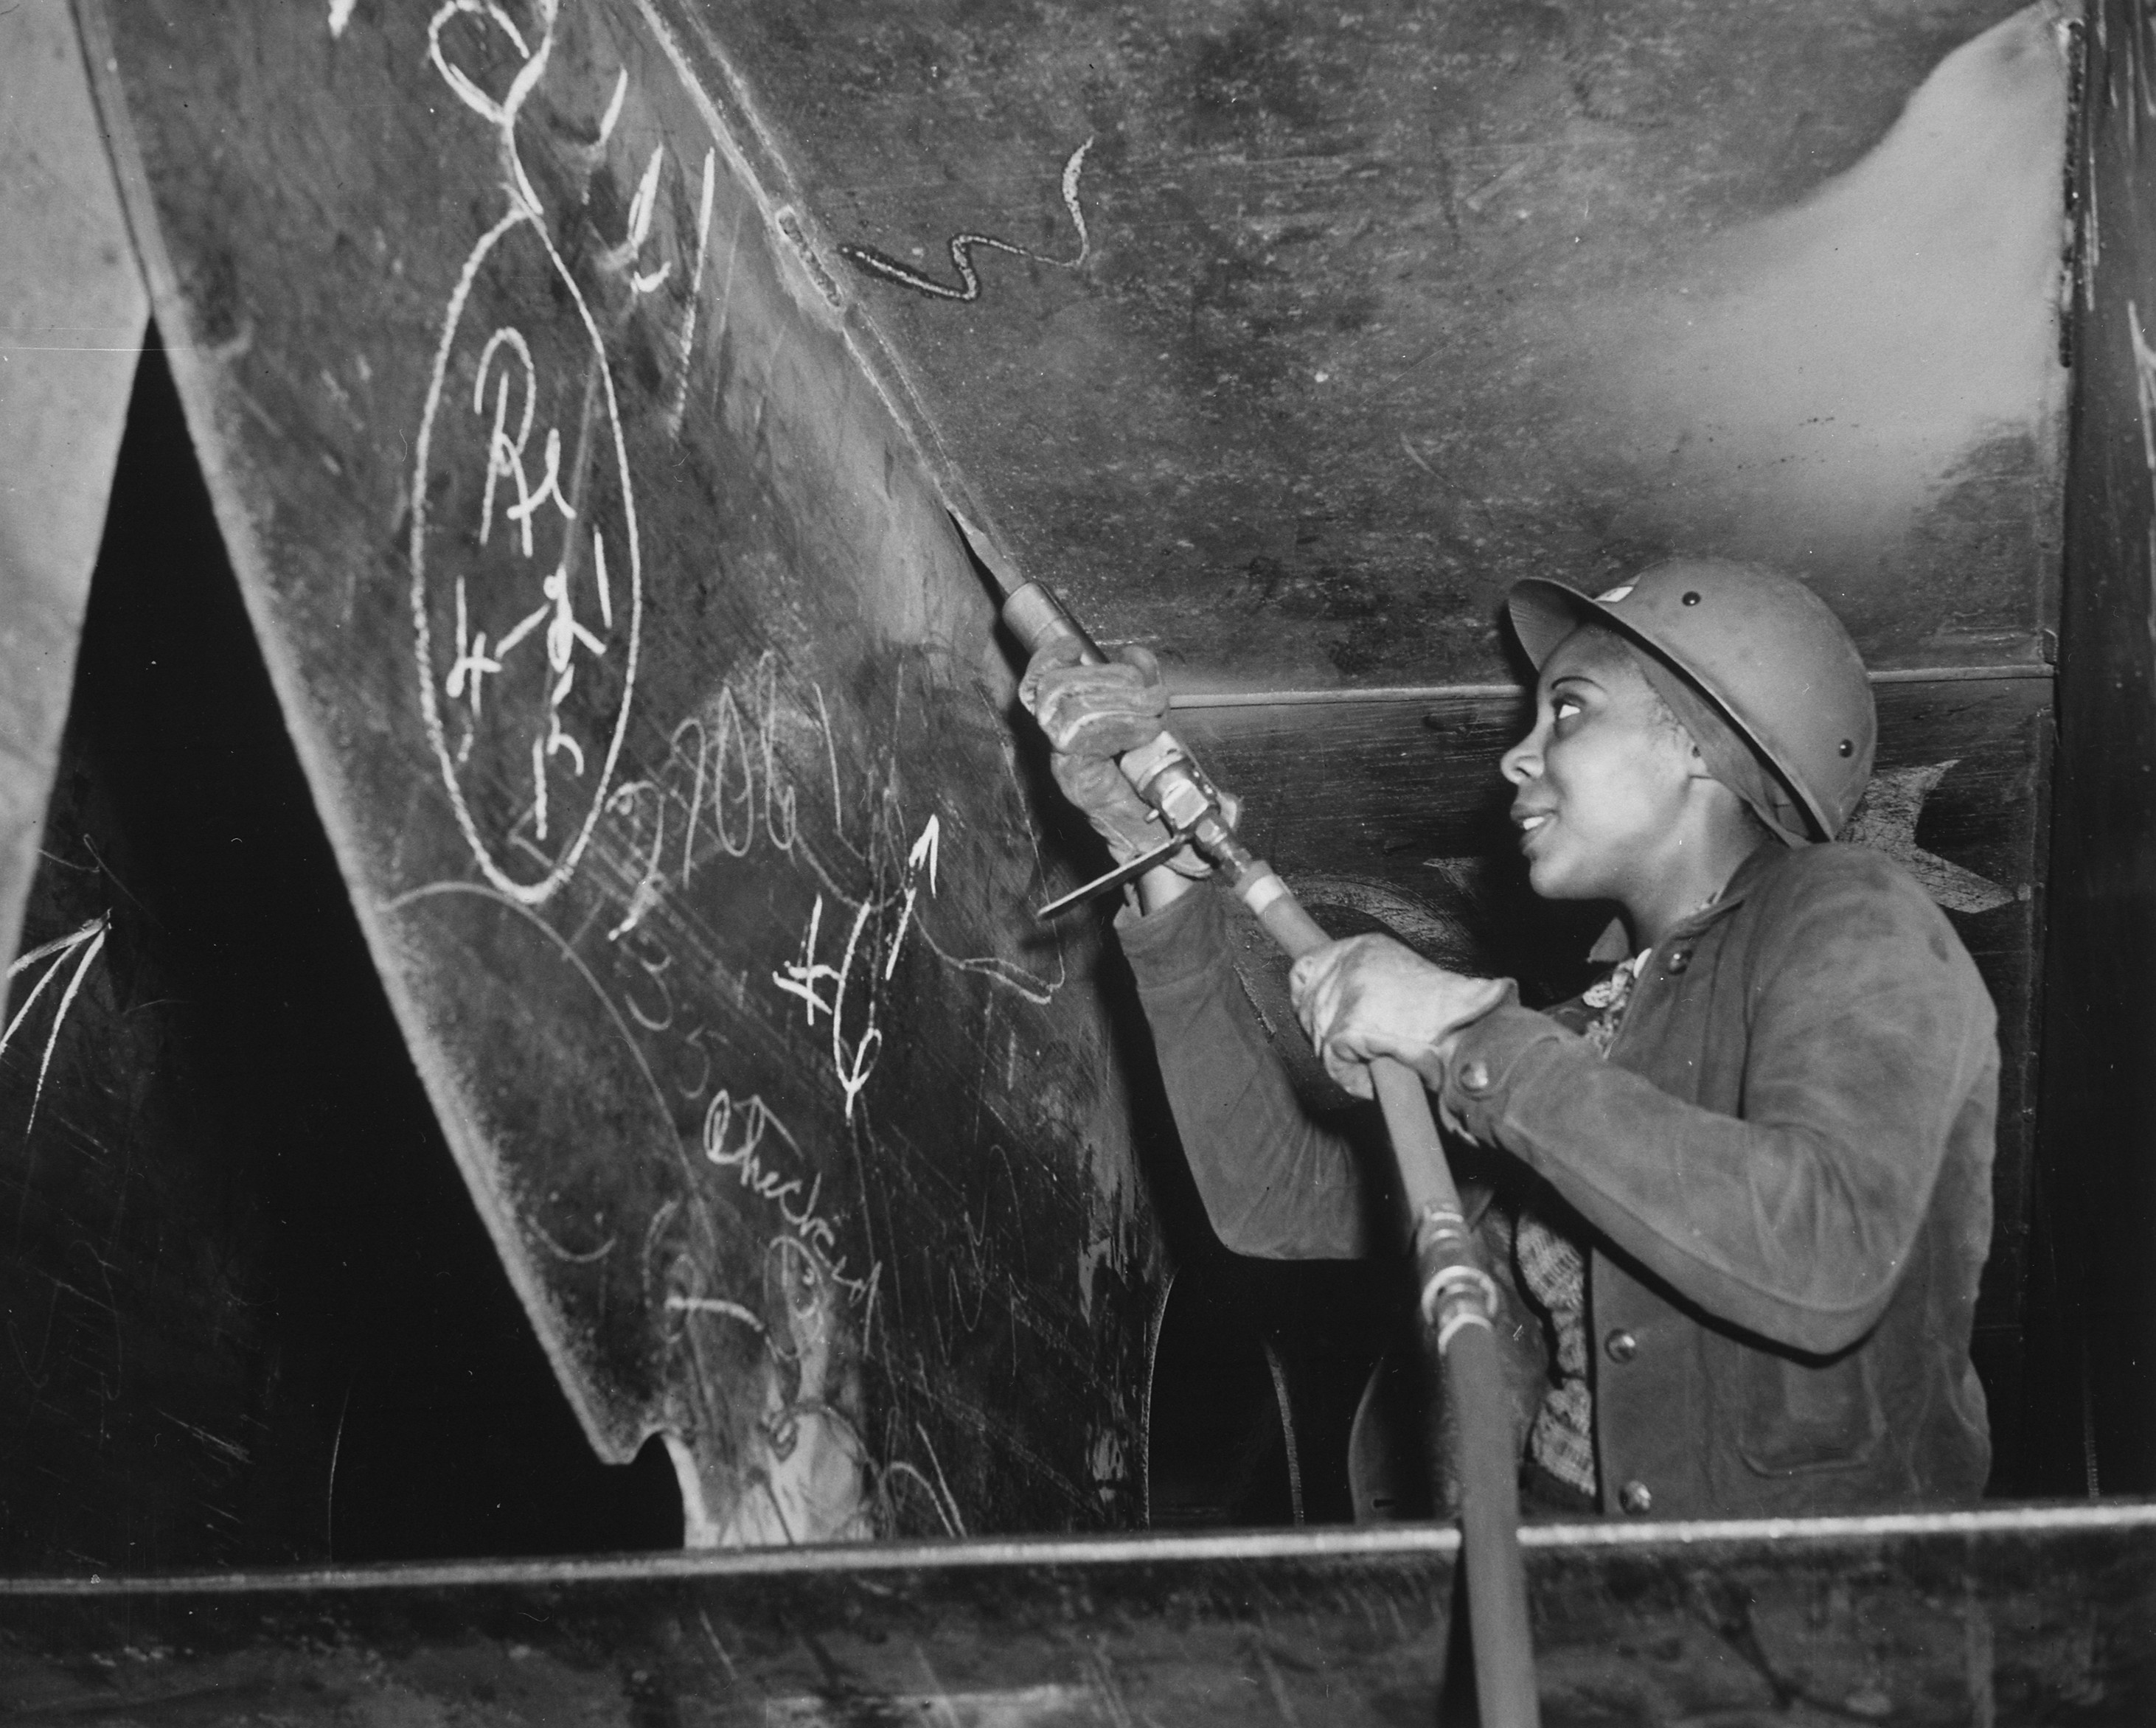 Female African-American worker Eastine Cowner working on Liberty ship SS George Washington Carver, Kaiser Richmond No. 1 Yard, Richmond, California, United States, Apr 1943